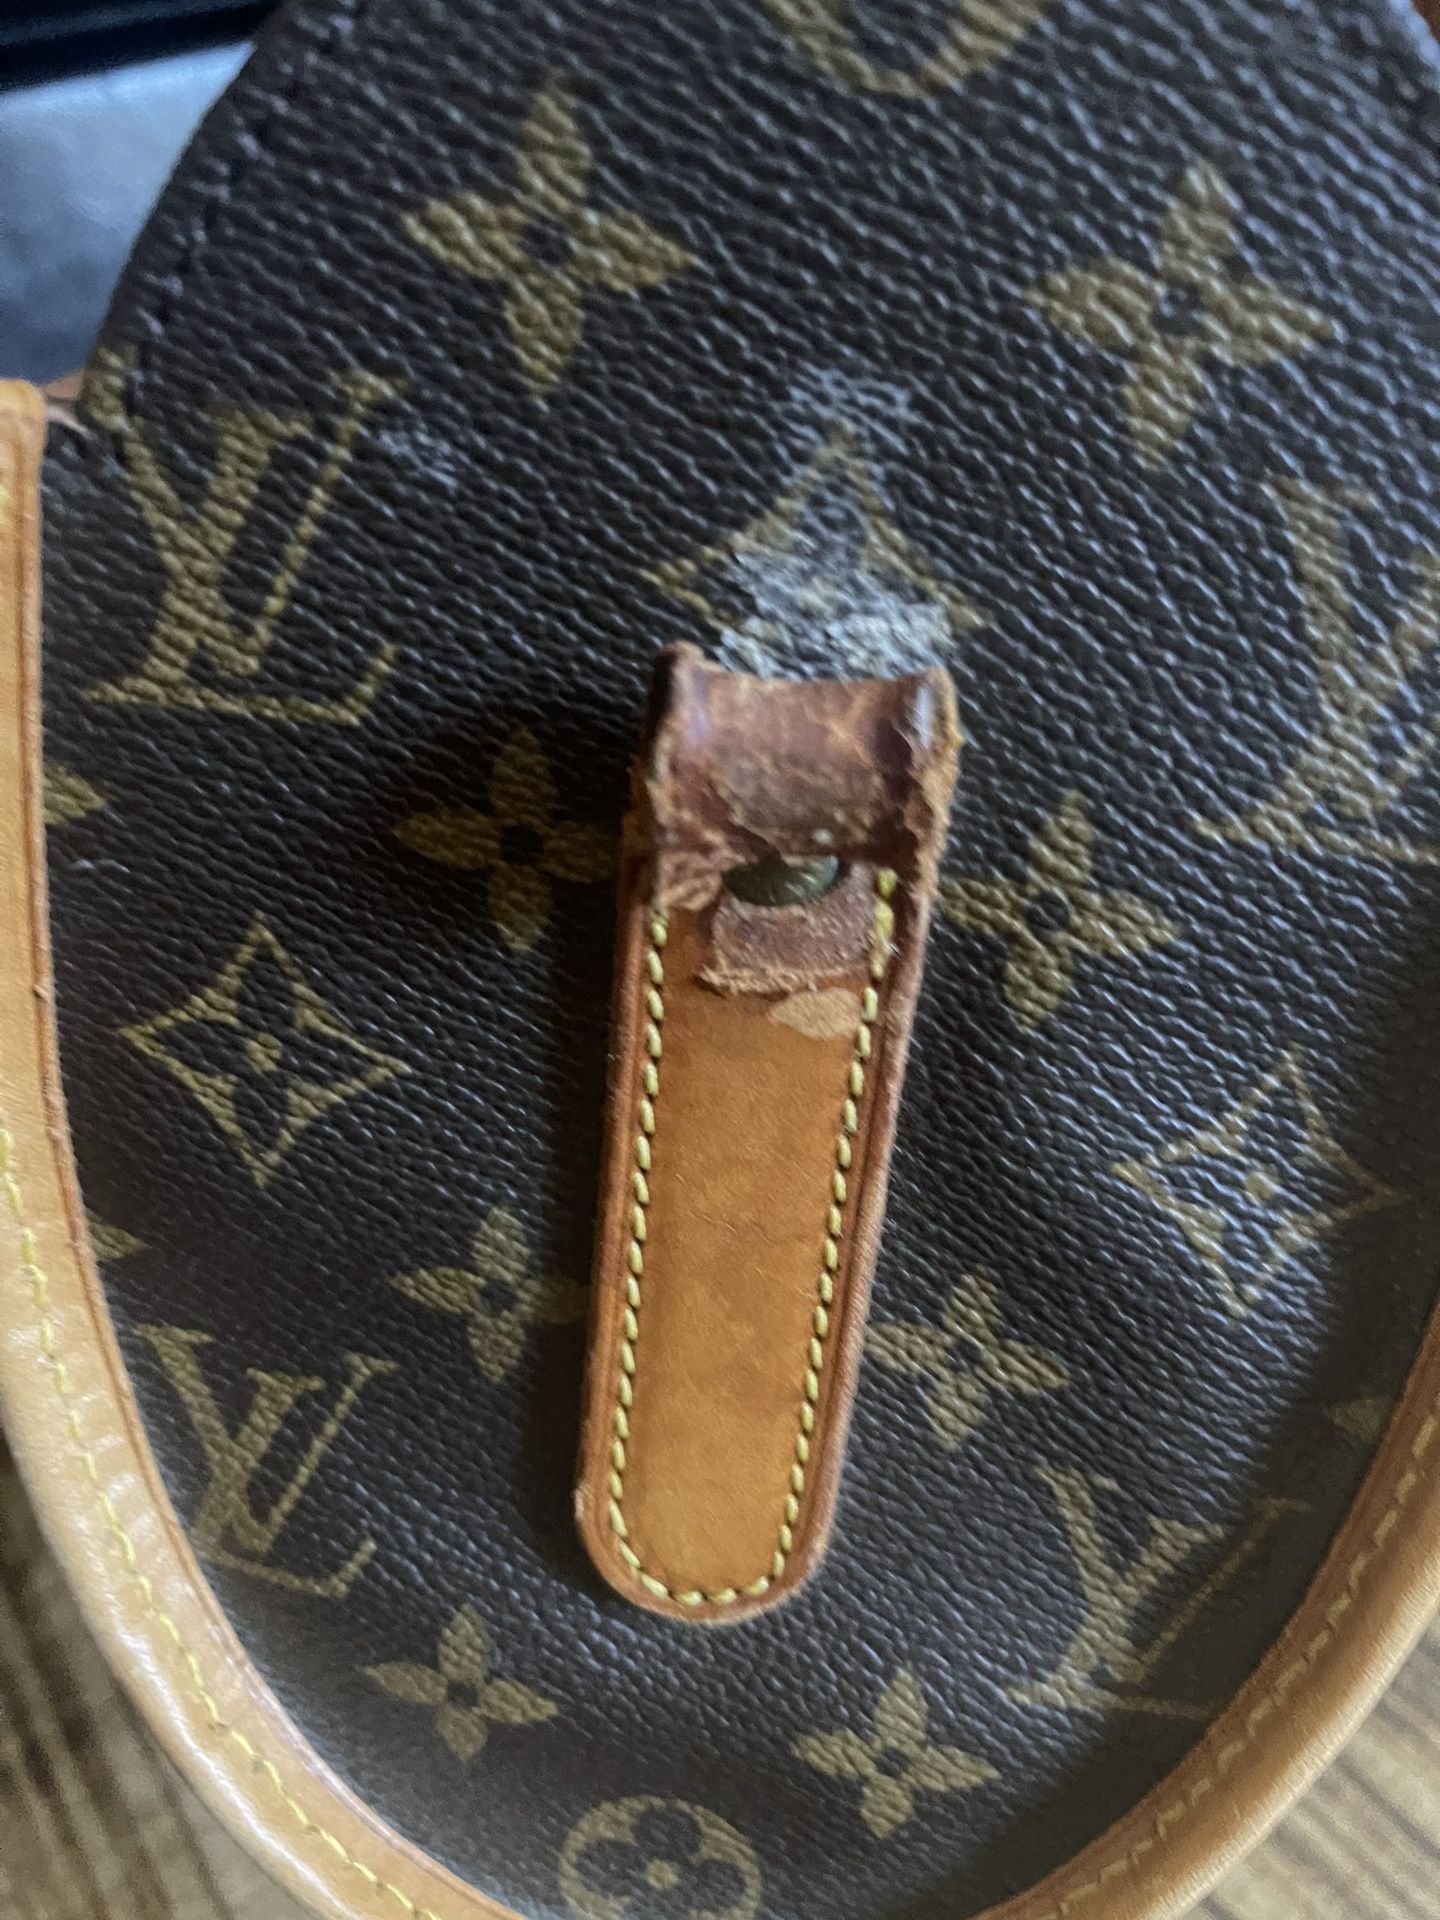 Louis Vuitton Bag For Spare Parts Only for Sale in San Dimas, CA